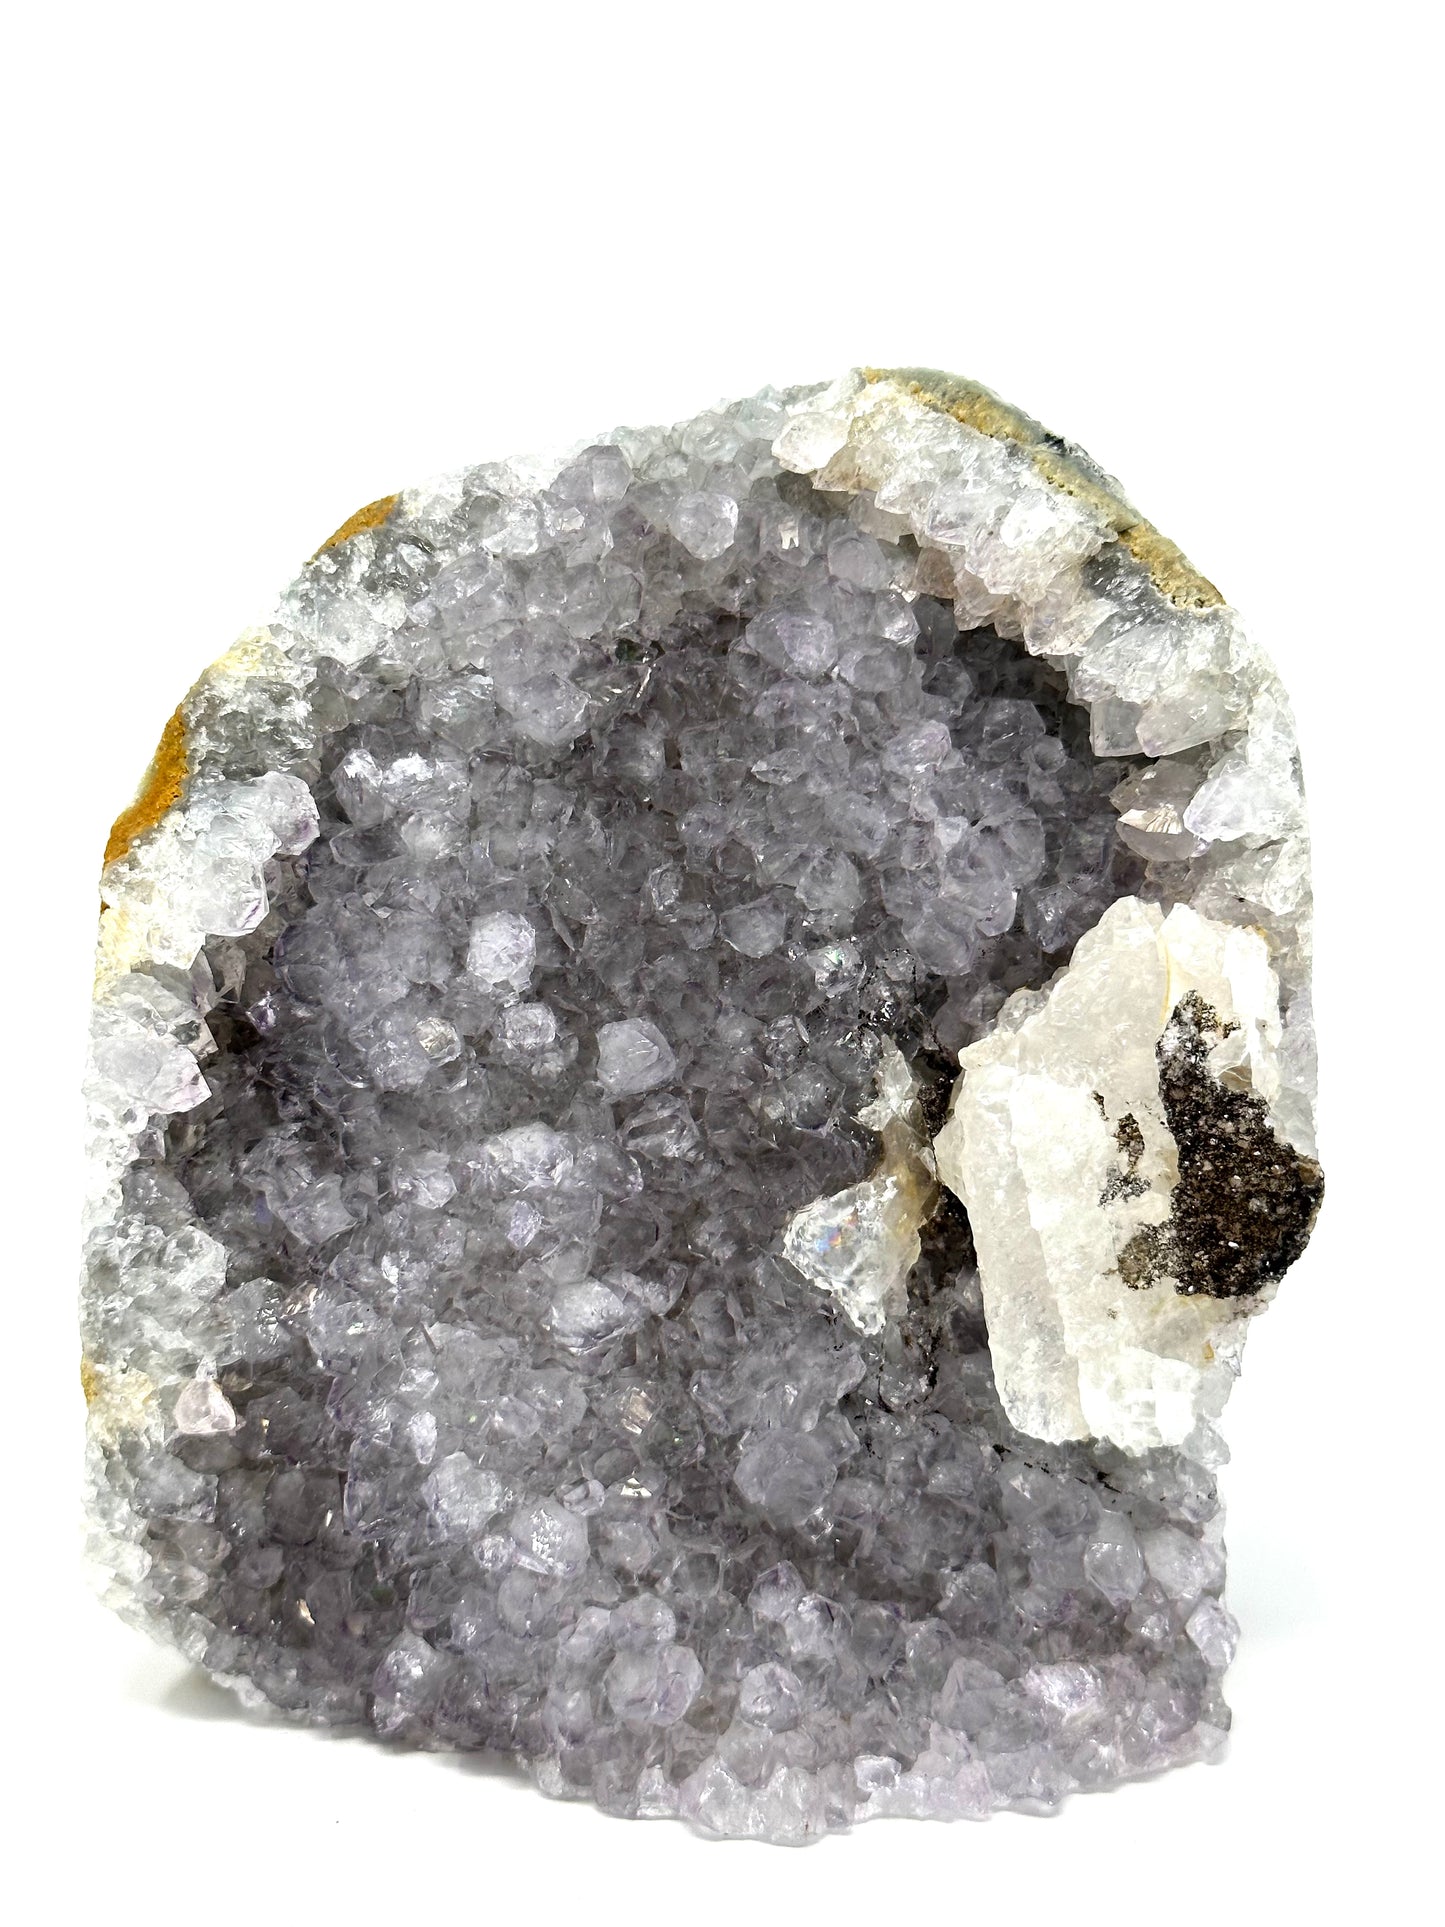 Nebula Amethyst featuring Gemmy Calcite and Marcasite Druse